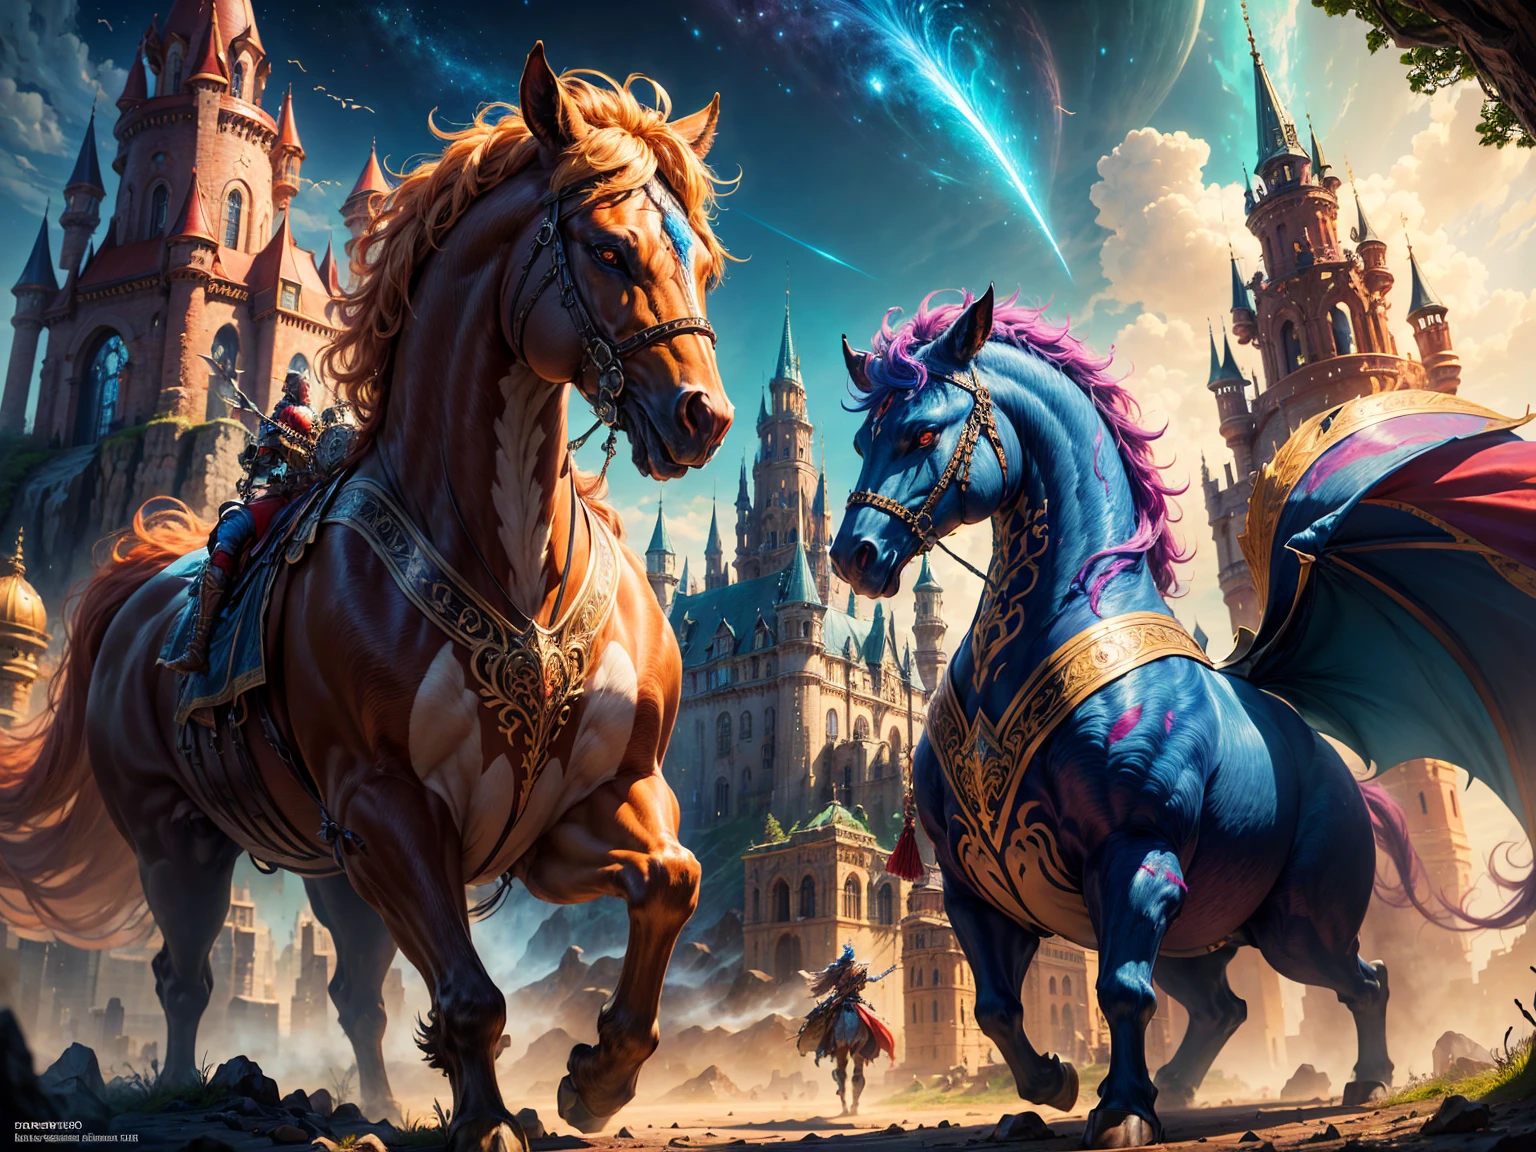 best quality,4k,8k,highres,masterpiece:1.2,ultra-detailed,realistic,photorealistic:1.37,epic fantasy scenes,brave warriors,mythical creatures,majestic castles,spectacular landscapes,imagination,world of fantasy,adventure,universe of magic,fantastic worlds,detailed characters,strong warriors,majestic creatures,magical beings,impressive castles,breathtaking landscapes,fantasy art,imagination,mythical creatures,detailed armor and weapons,ornate castles,towering mountains,mysterious forests,enchanted landscapes,vivid colors,rich color palette,dramatic lighting,ambient light,magical atmosphere,awe-inspiring landscapes,emotive characters,heroic poses,action-packed scenes,epic battle scenes,beyond human imagination,unexplored realms,unprecedented detail,fantastic realms, colorido, hermosos colores ,HD.